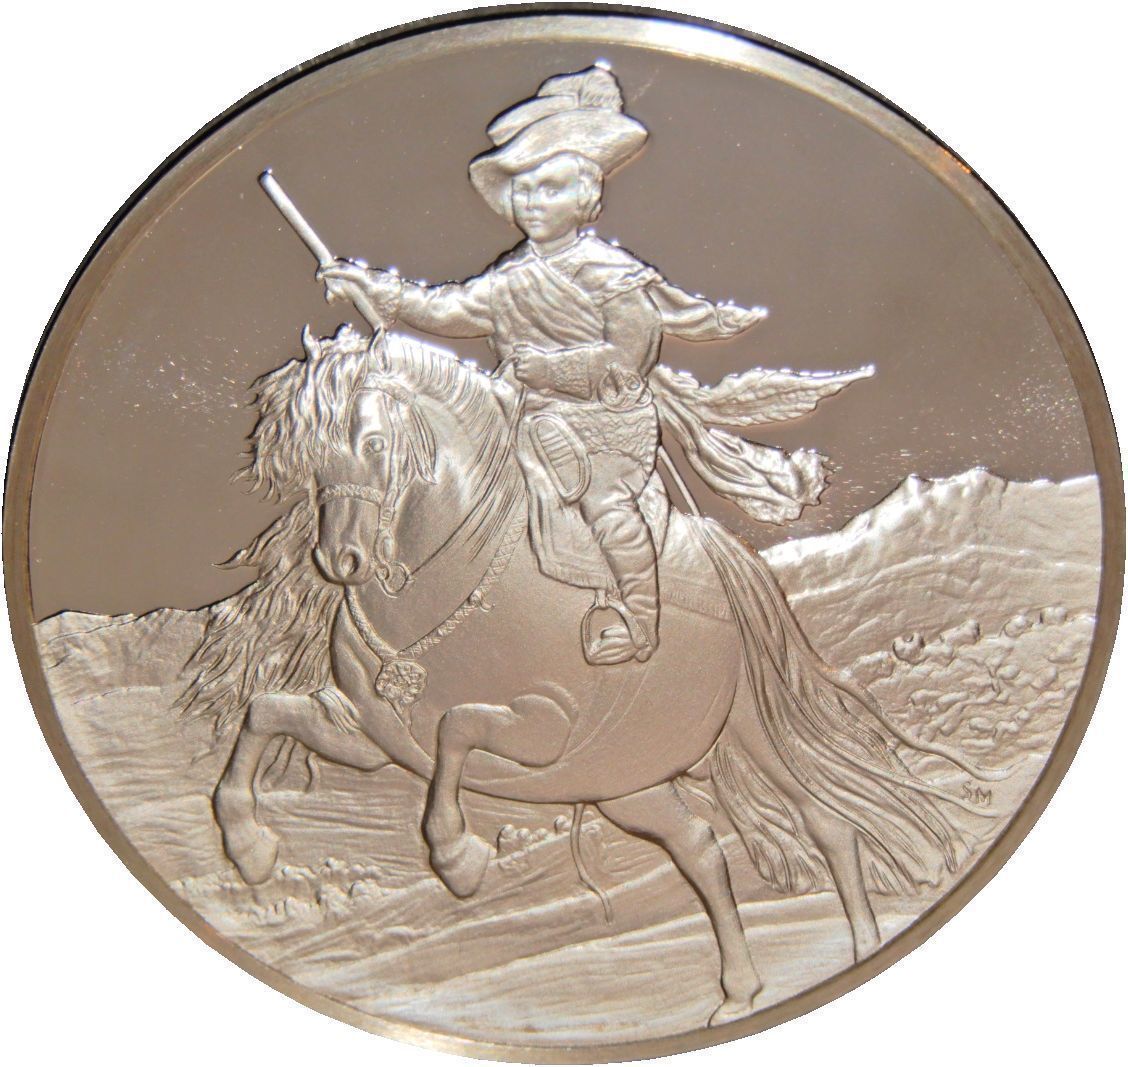  limited goods ultimate beautiful goods France structure . department made large warehouse . official certification stamp painter belaskes picture karu Roth . horse image original silver made silver memory medal chapter . insignia coin souvenir 